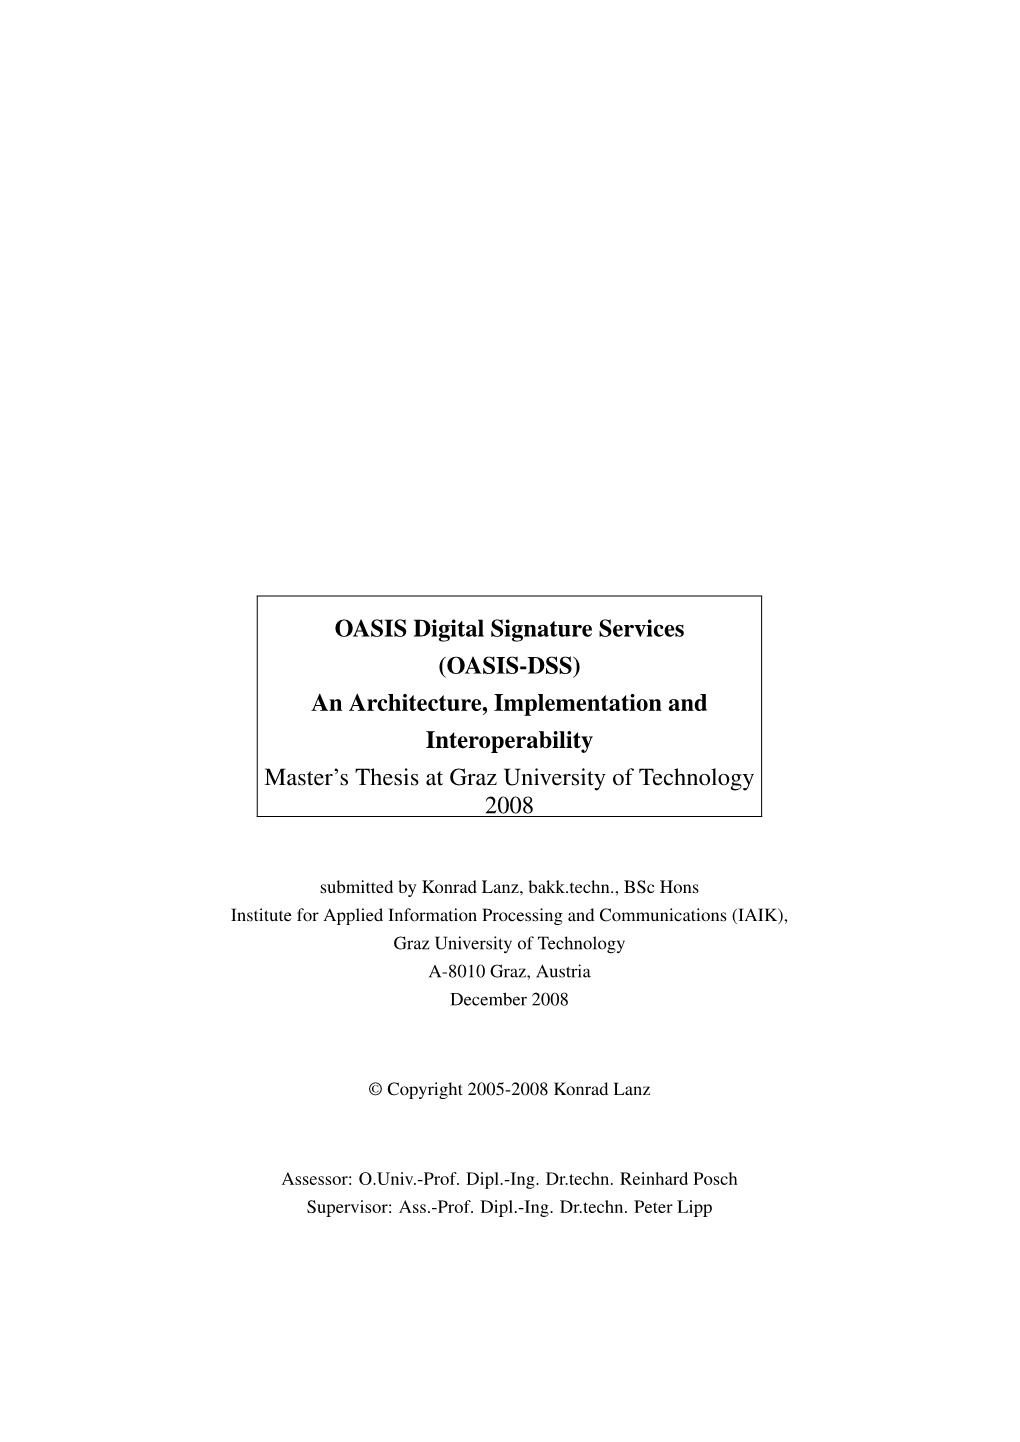 OASIS Digital Signature Services (OASIS-DSS) an Architecture, Implementation and Interoperability Master’S Thesis at Graz University of Technology 2008